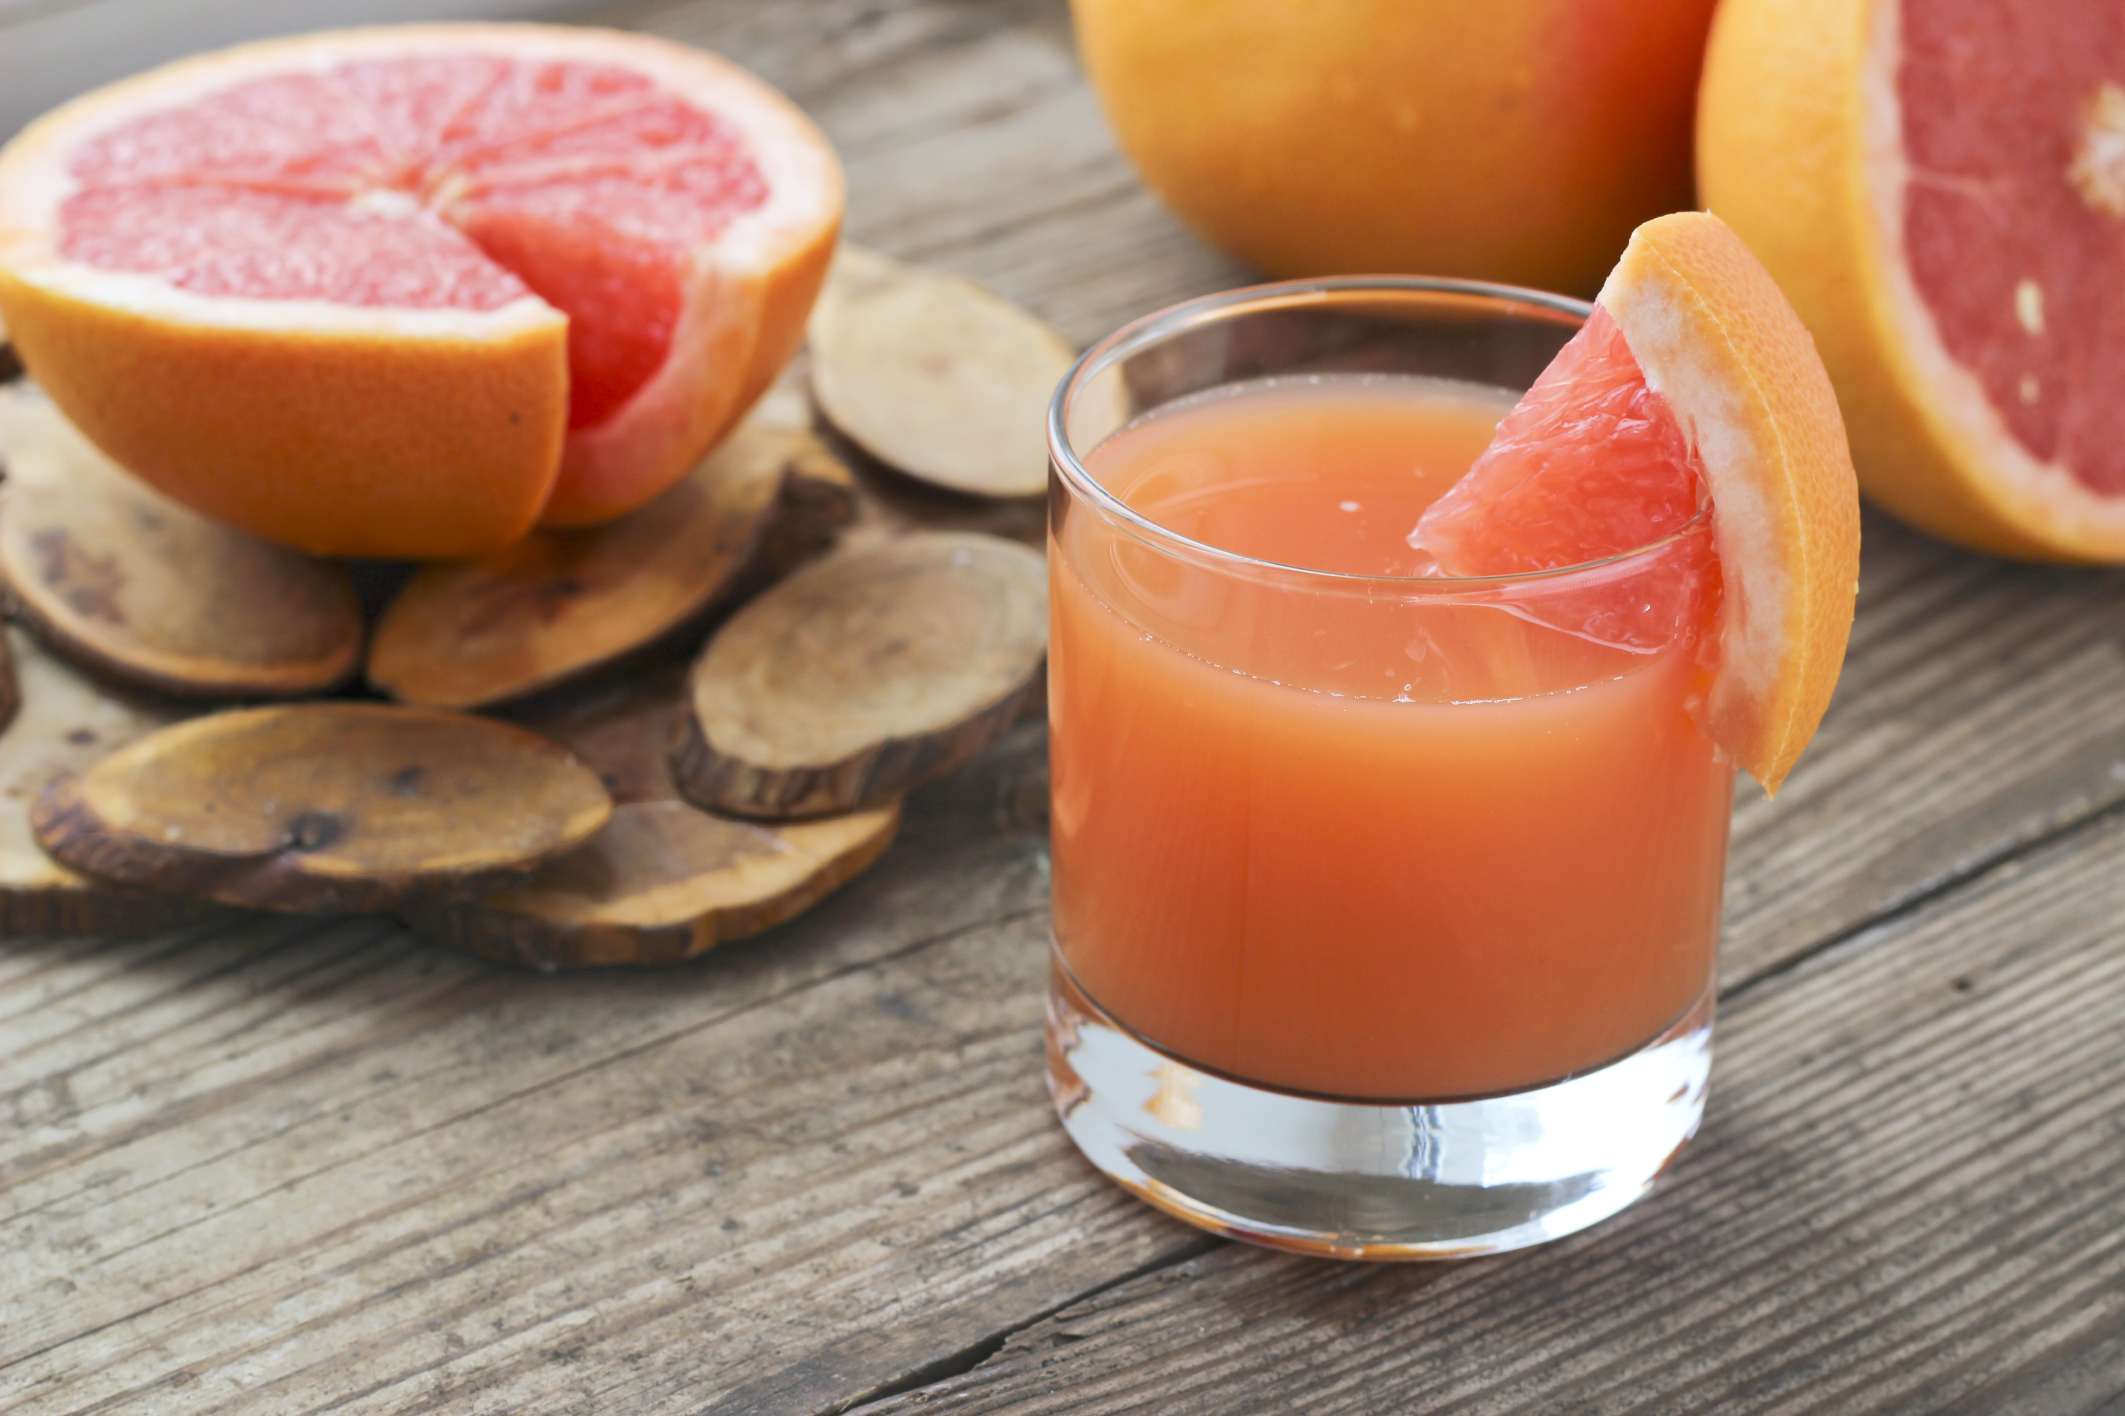 Grapefruit Juice For Weight Loss: Does It Work? | Livestrong